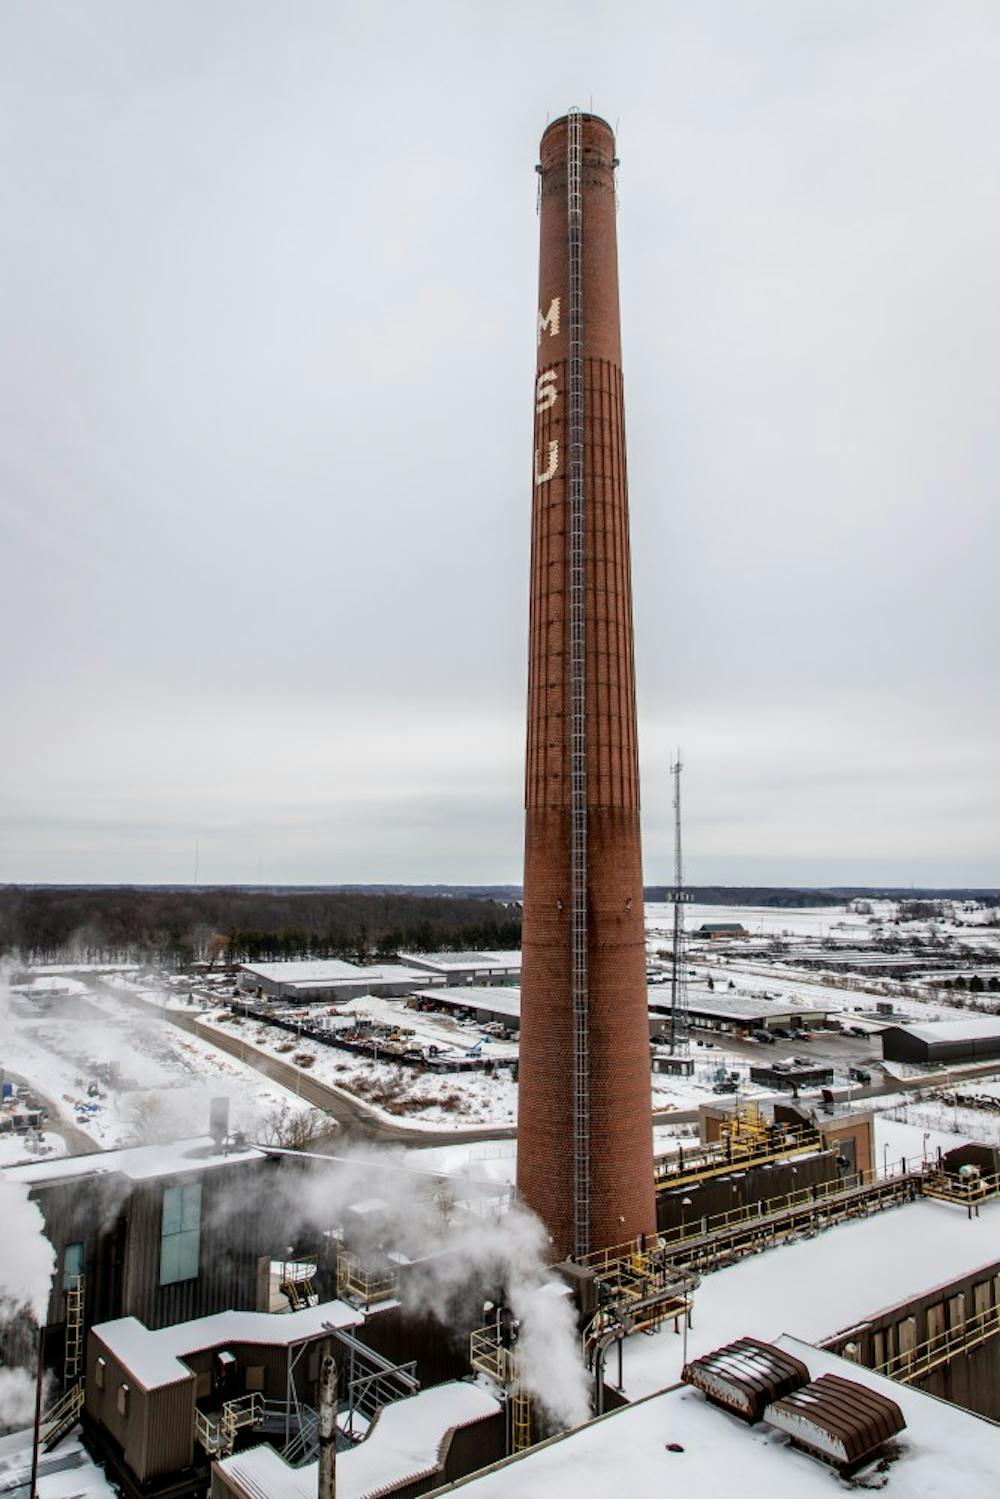 <p>Pictured is one of the smoke stacks from the T.B. Simon Power Plant on Feb. 14, 2019 in East Lansing. The T.B. Simon Power Plant is the main energy provider for Michigan State University's main campus.</p>